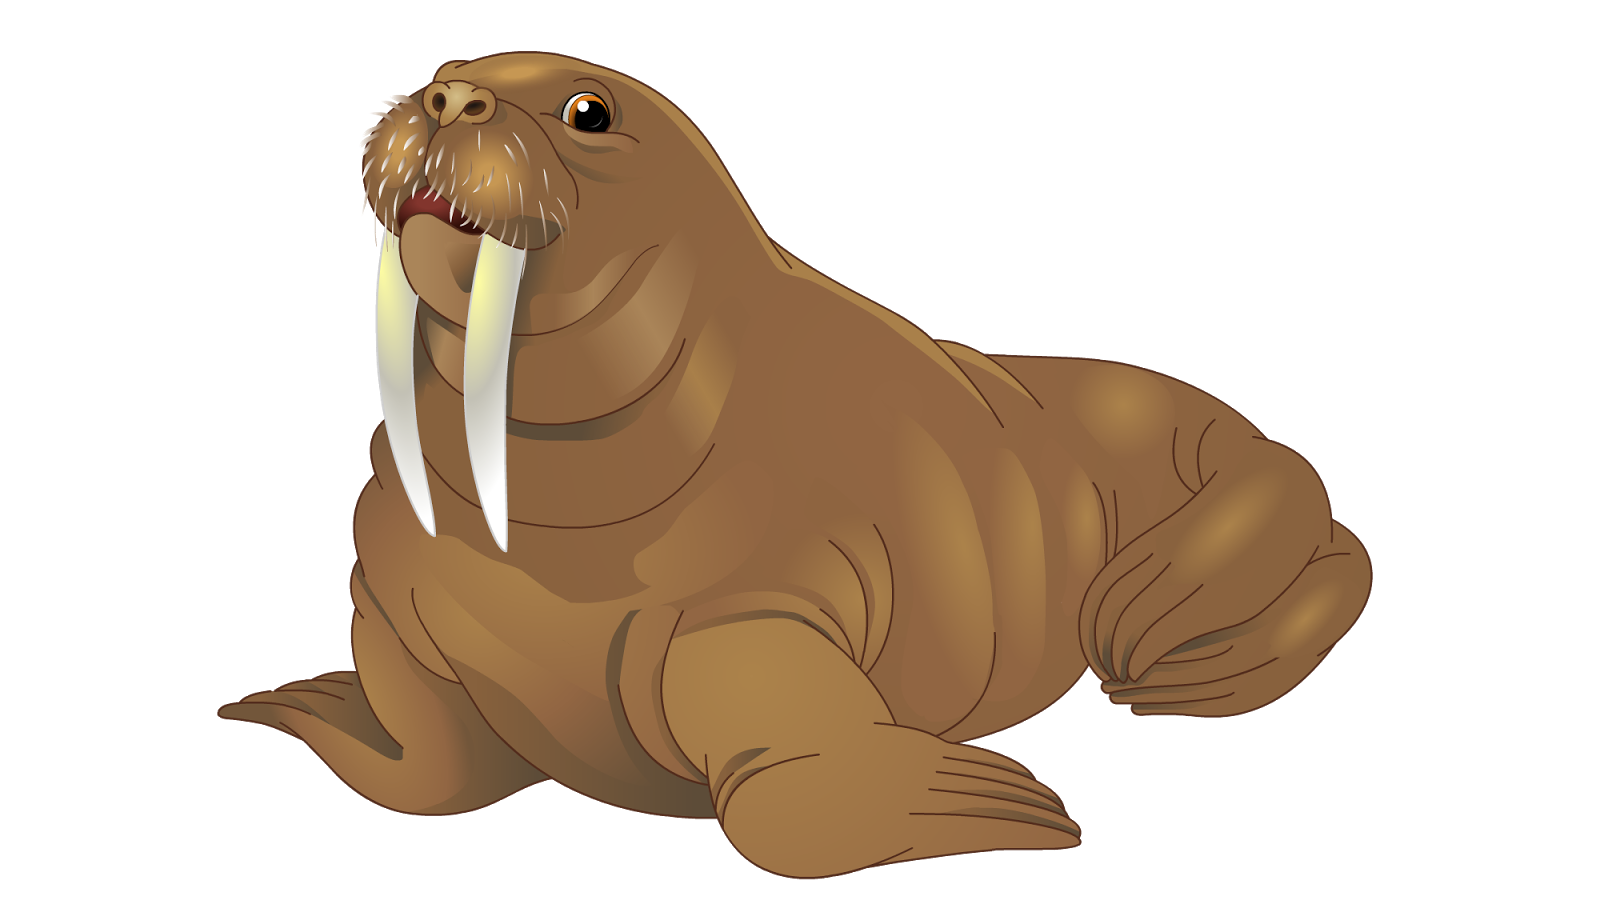 File:Walrus zombieHD.png